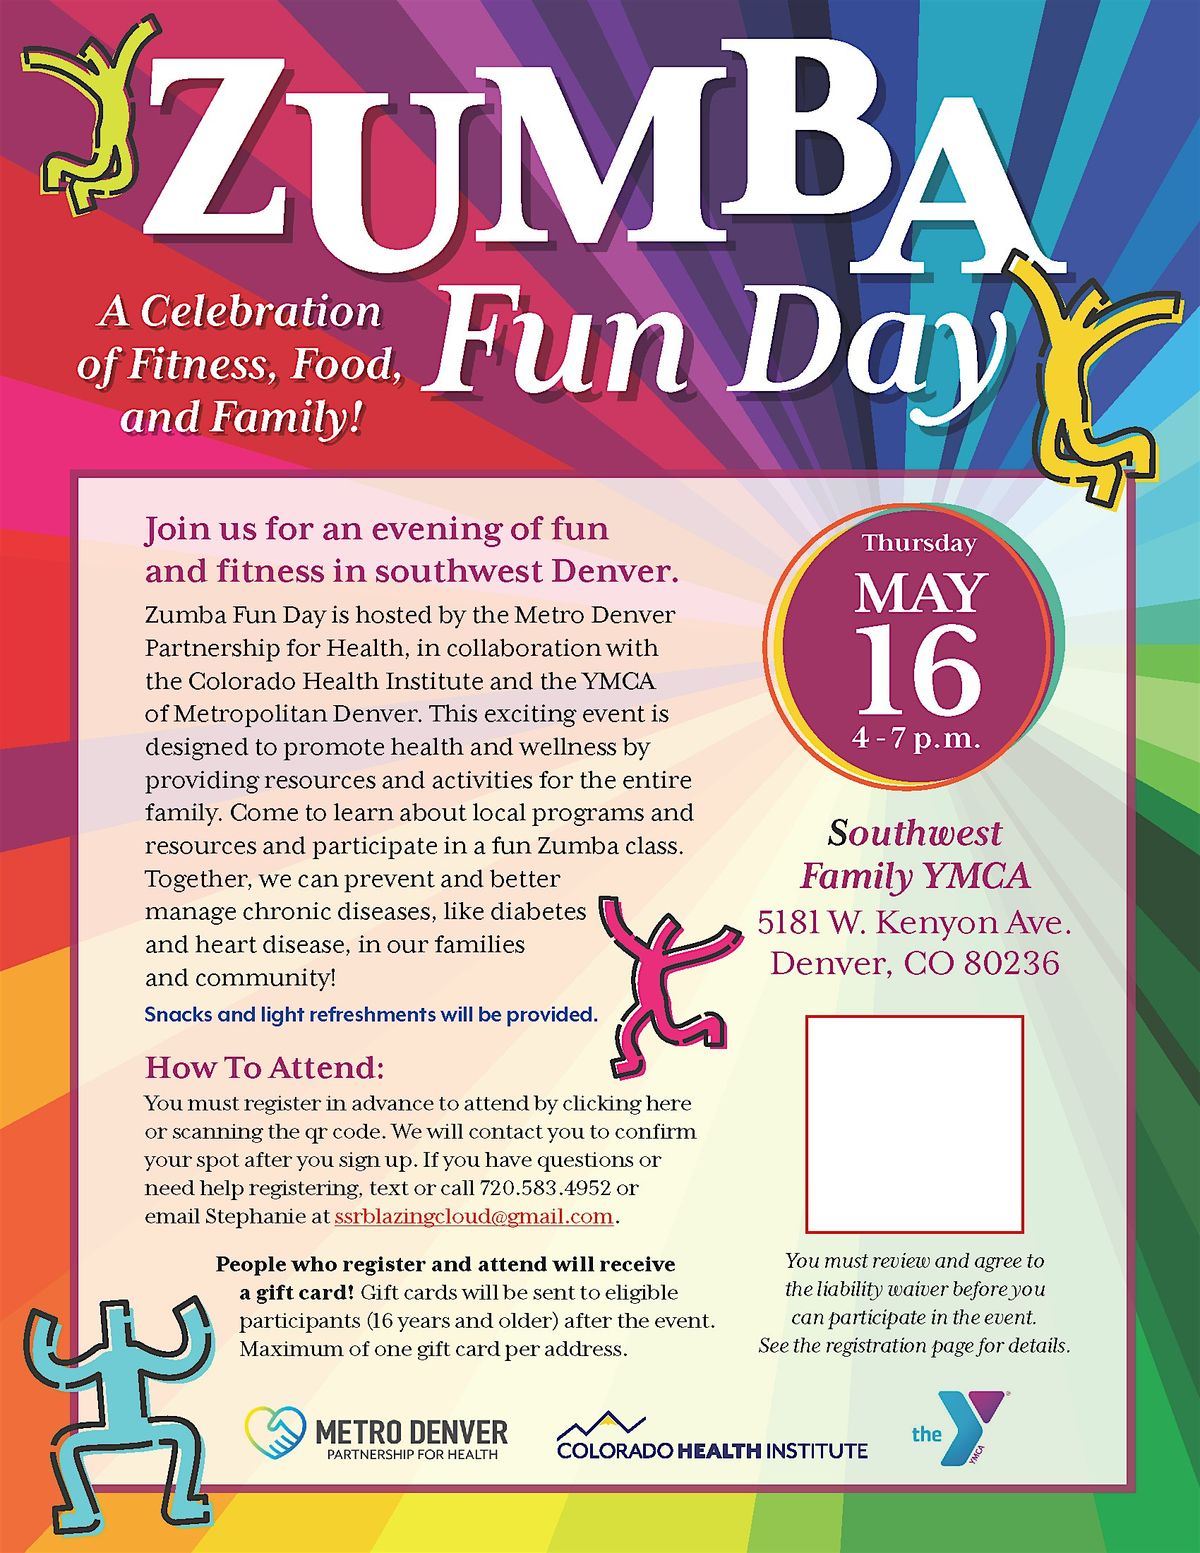 Zumba Fun Day: A Celebration of Fitness, Food, and Family!